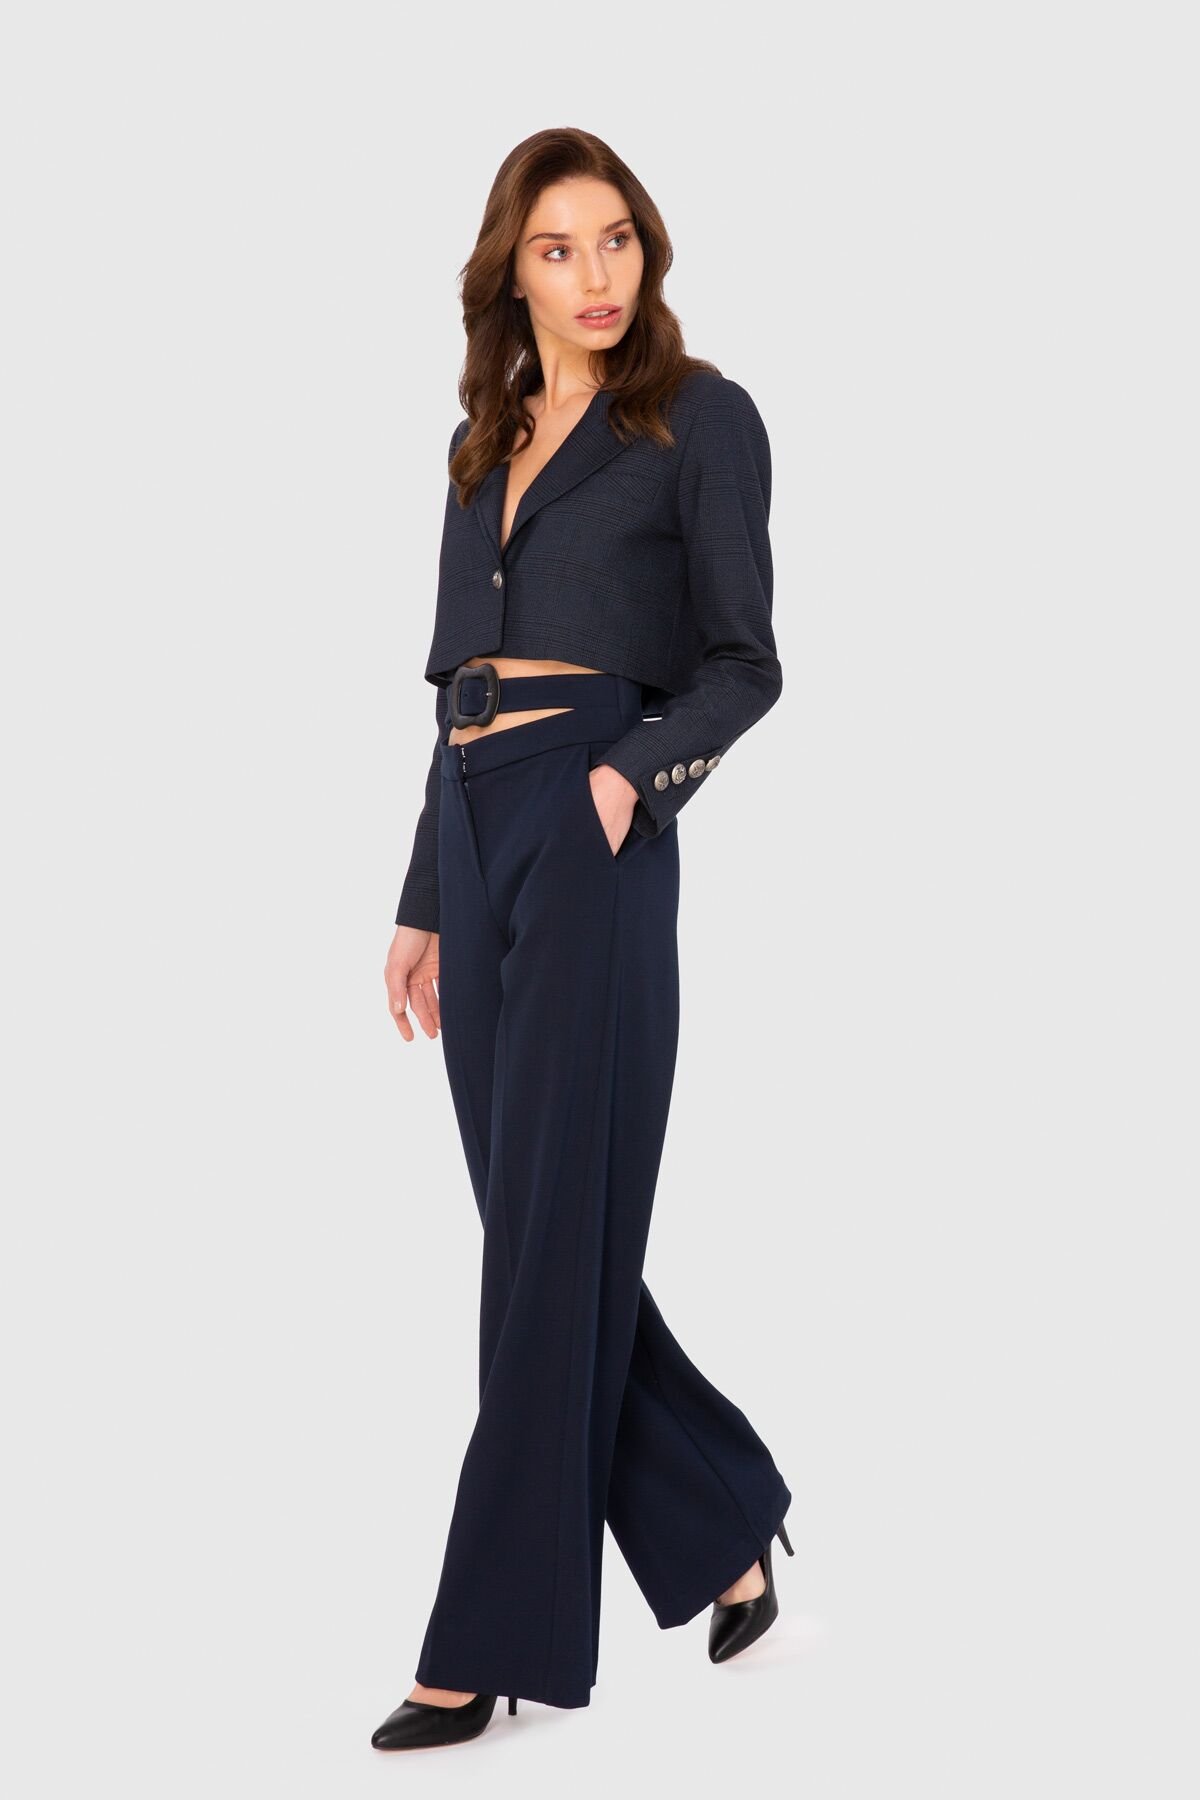 Navy Blue Suit With Waist Detail Short Jacket